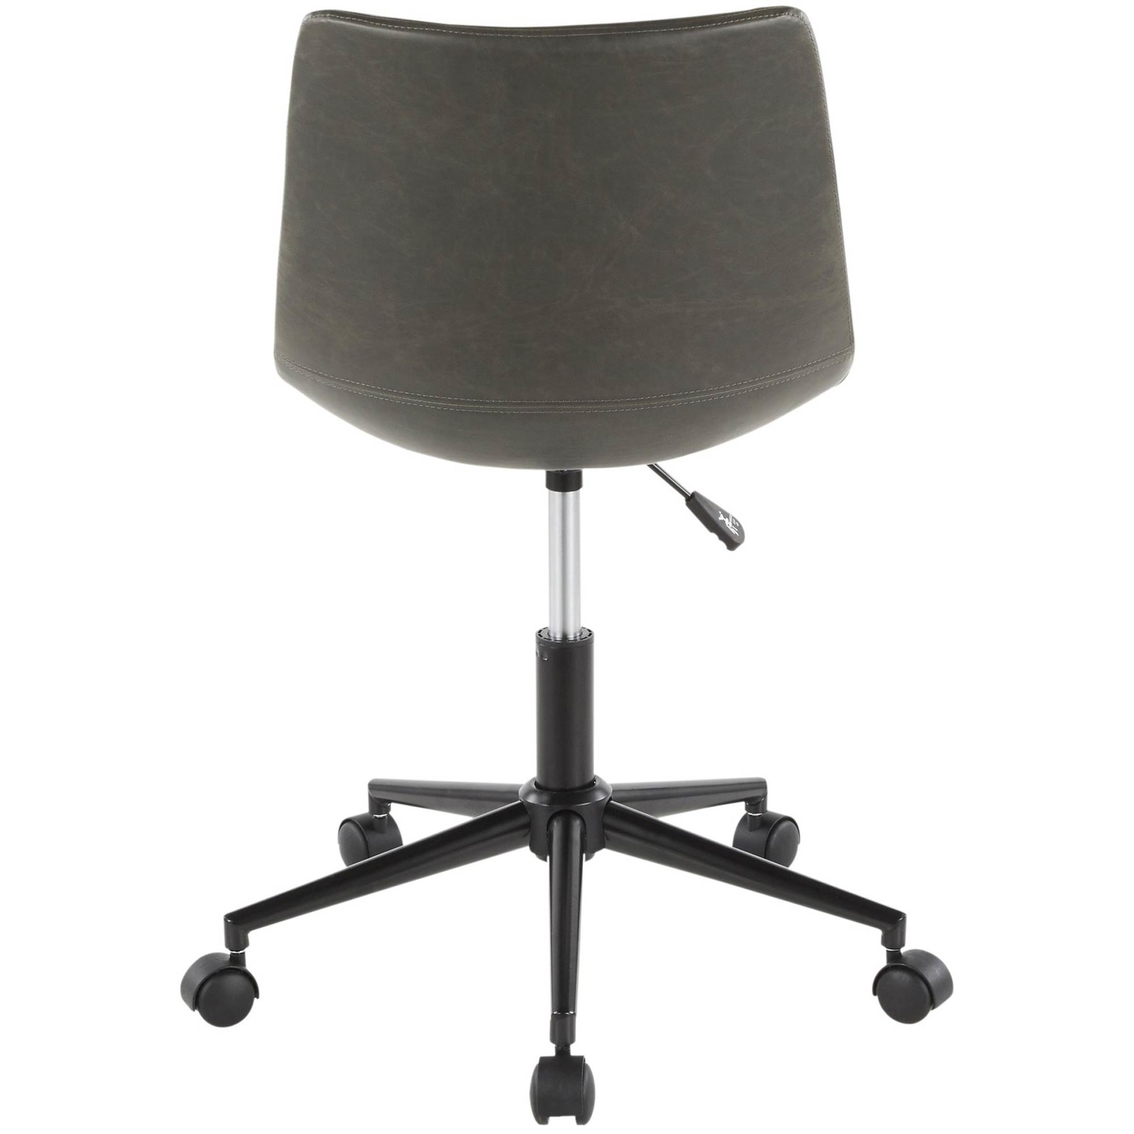 LumiSource Duke Task Industrial Chair - Image 4 of 6